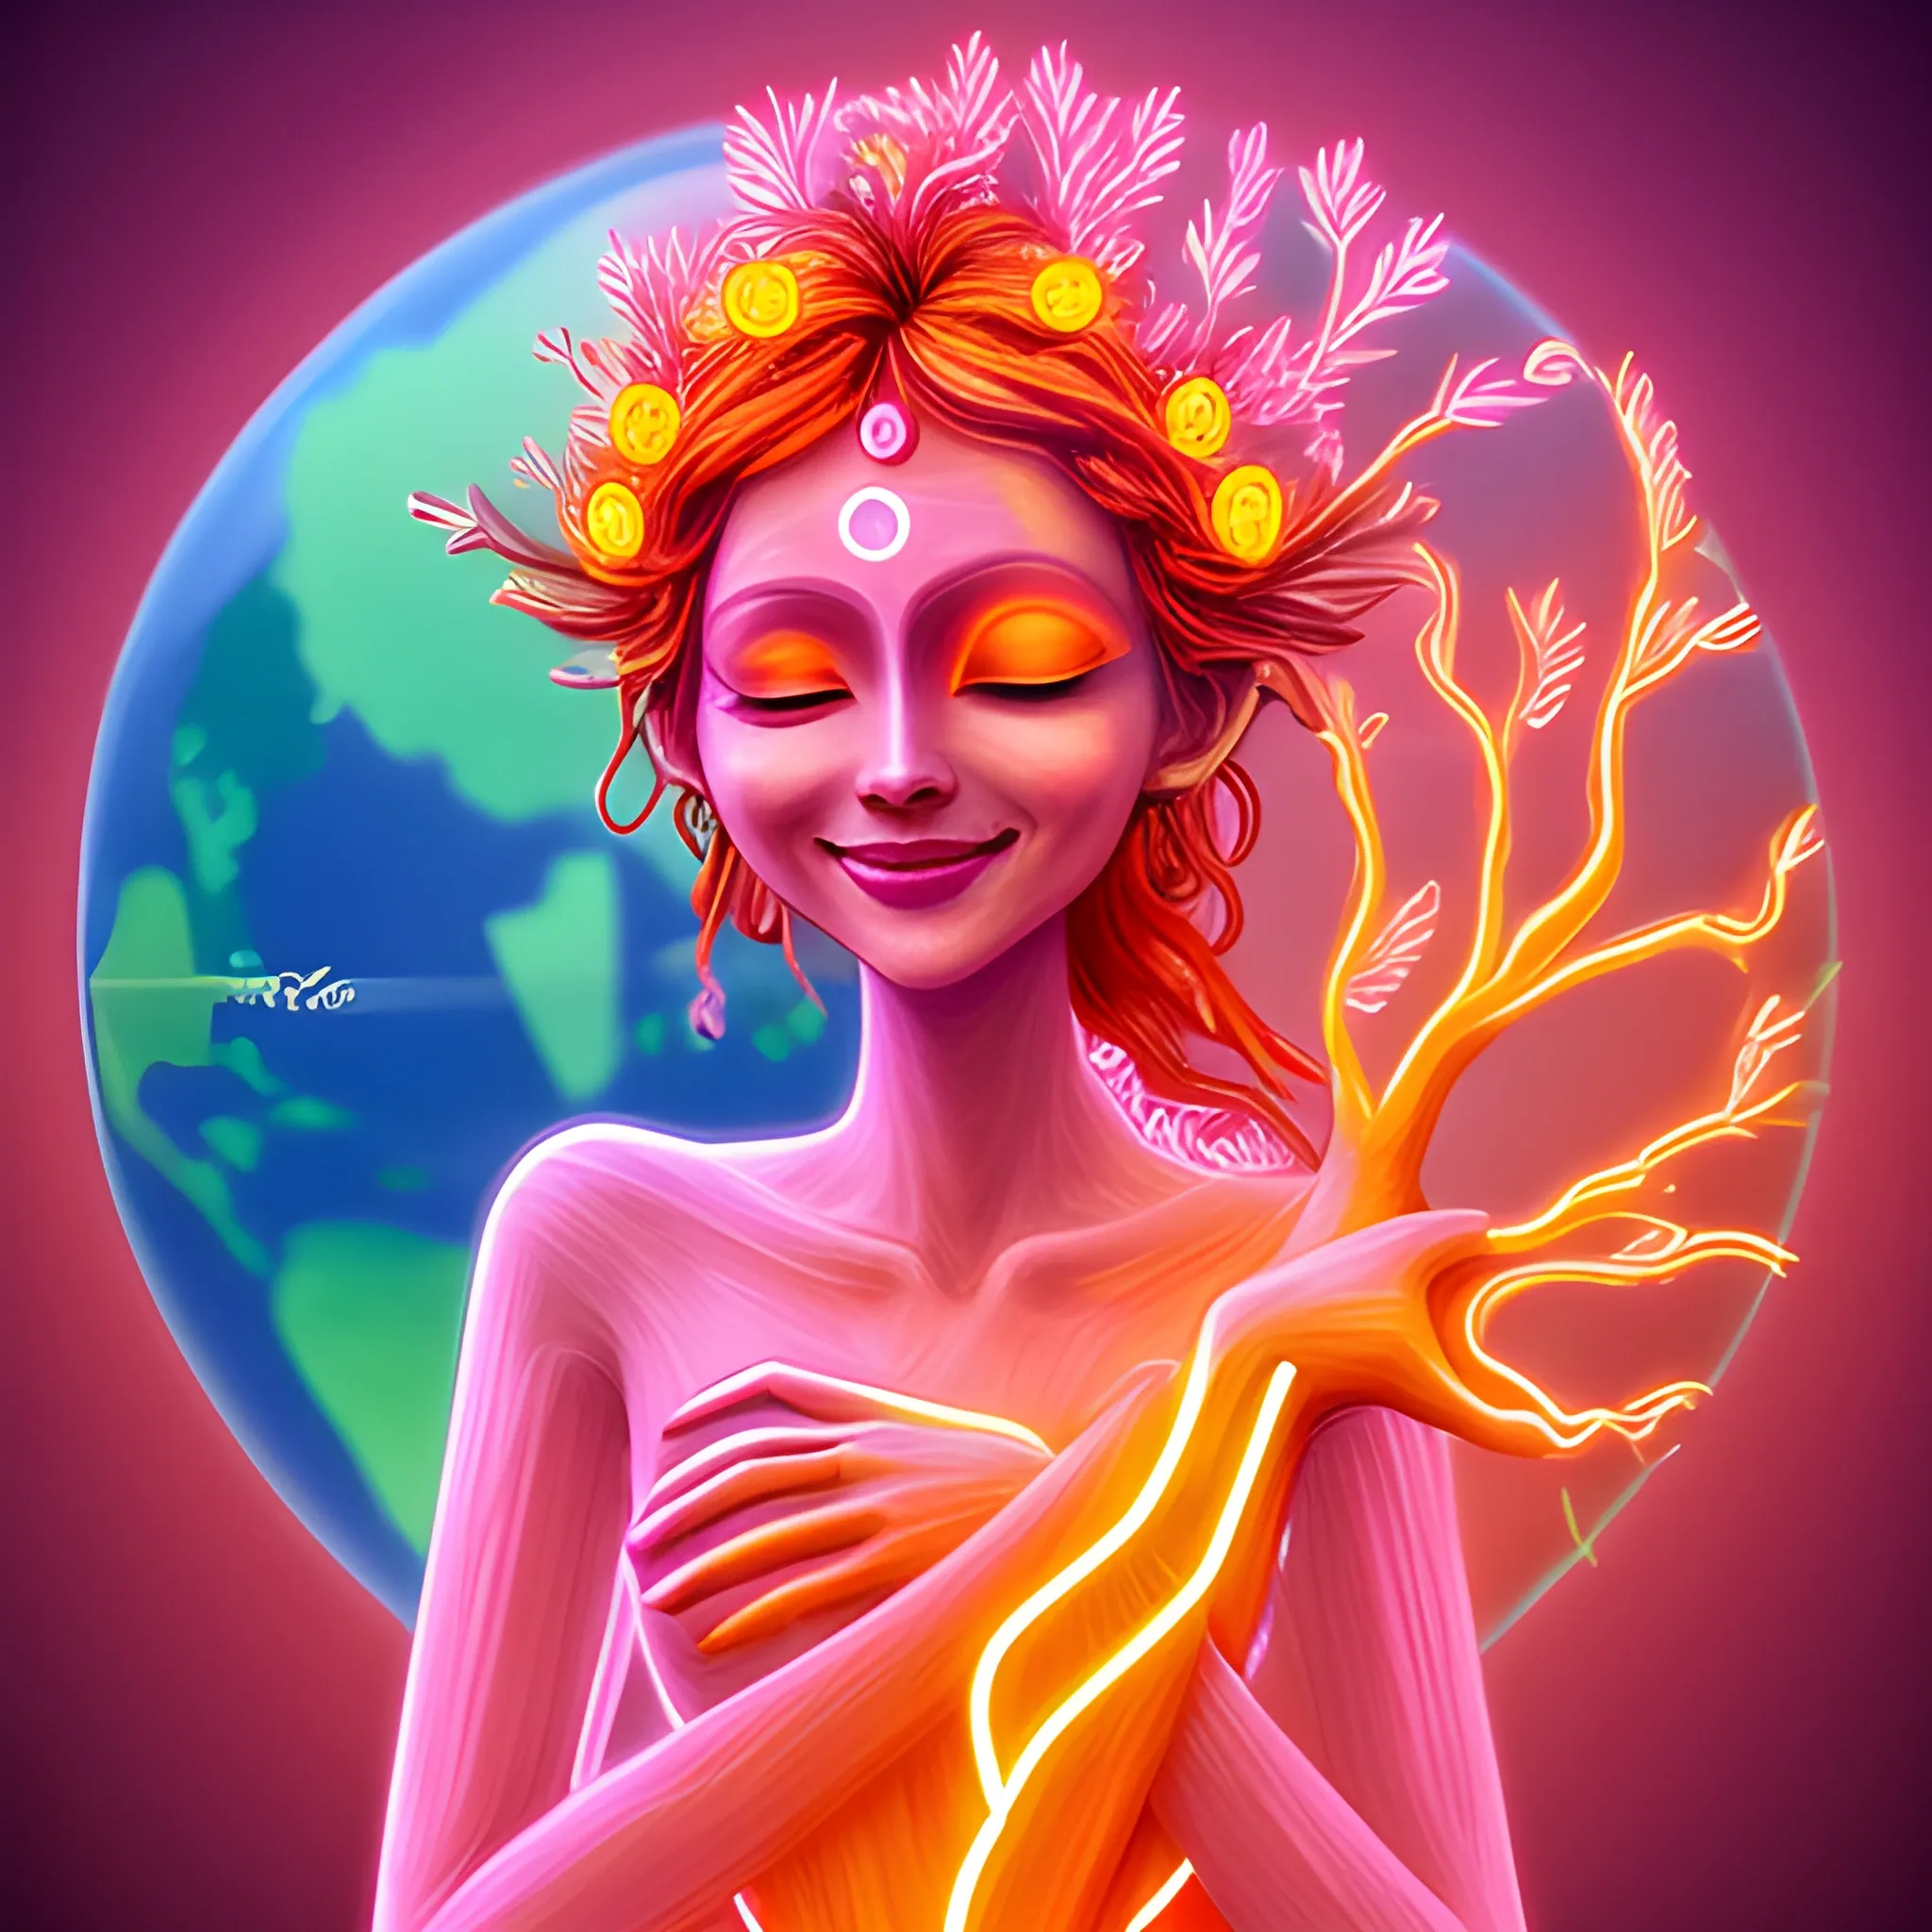 oniric goddes with tree arms pink and orange skin with neon aura smiling at earth